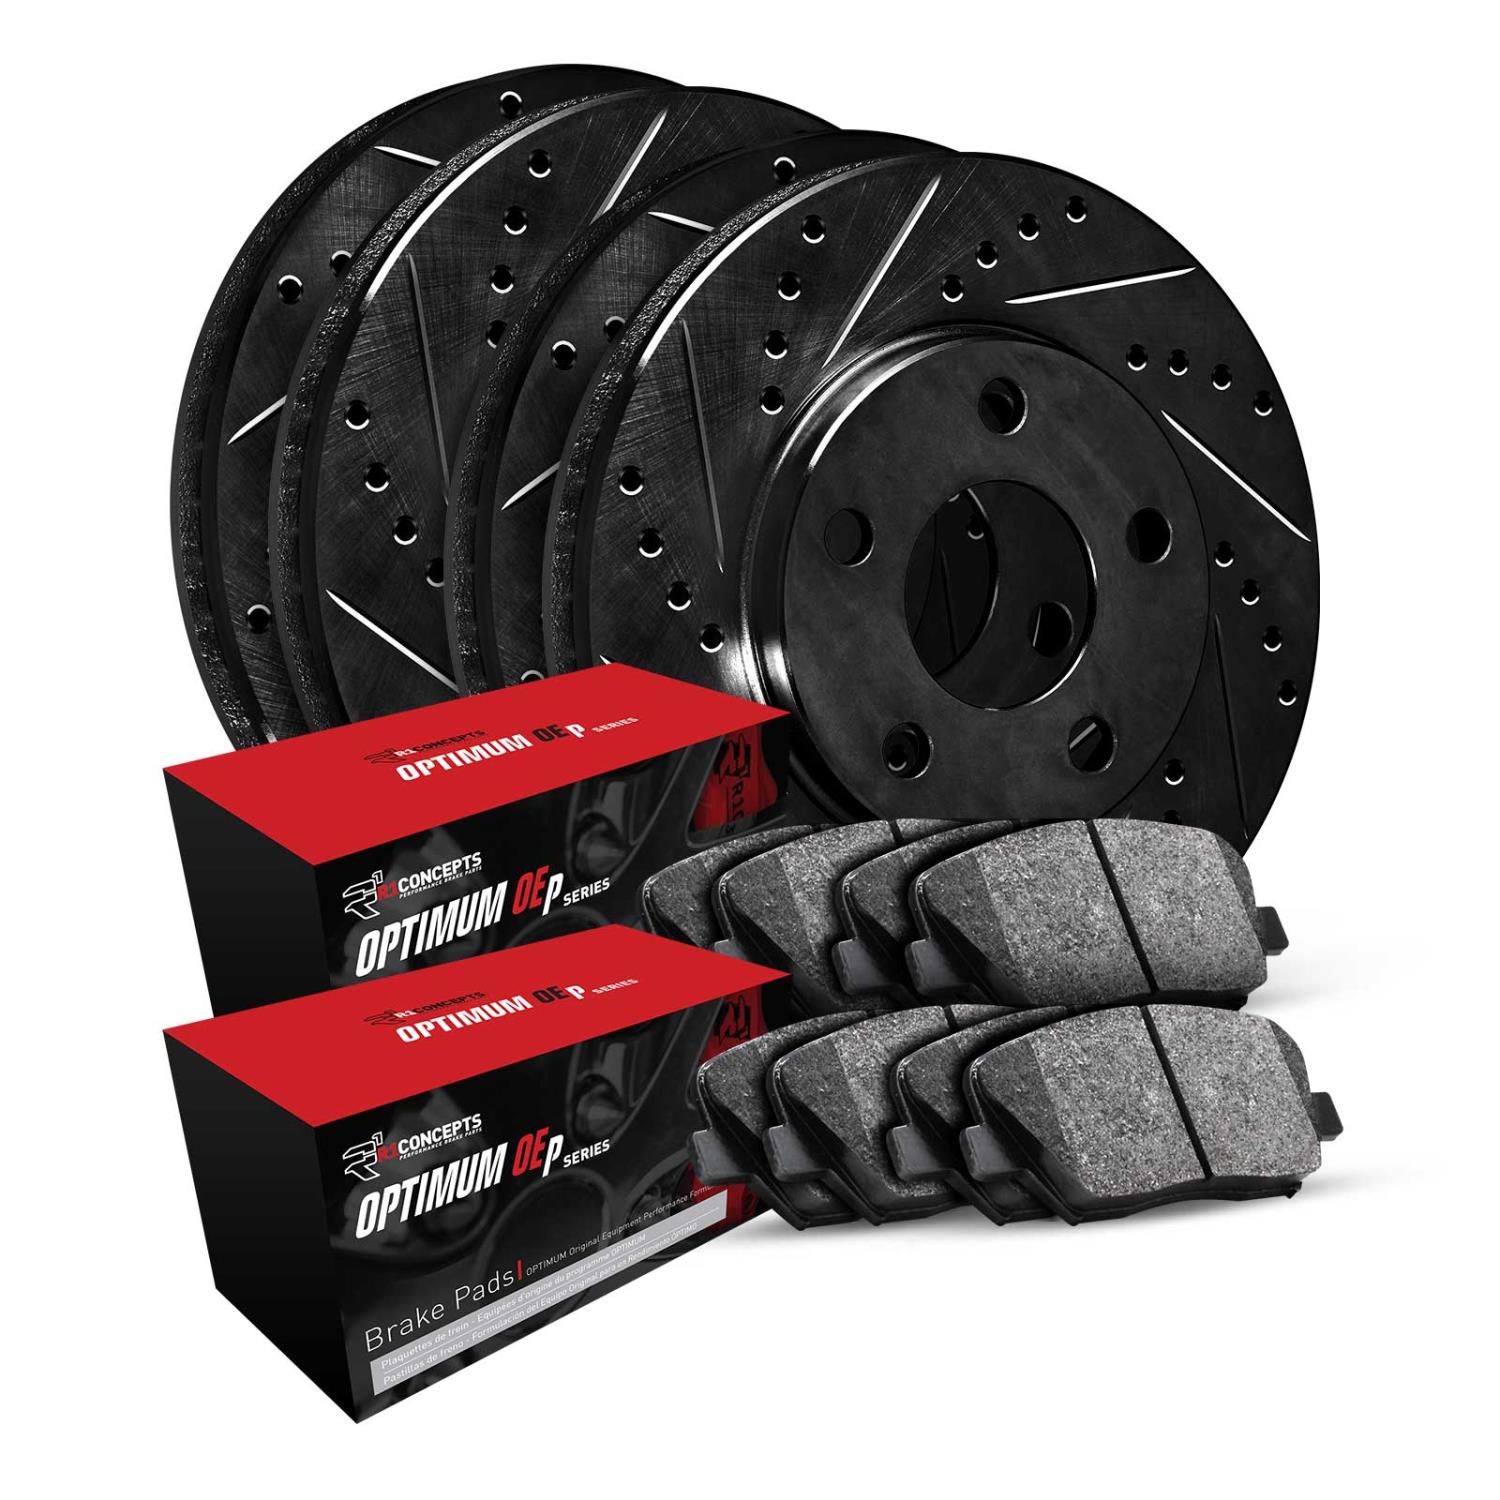 E-Line Drilled & Slotted Black Brake Rotor & Drum Set w/Optimum OE Pads & Shoes, 2006-2012 Fits Multiple Makes/Models